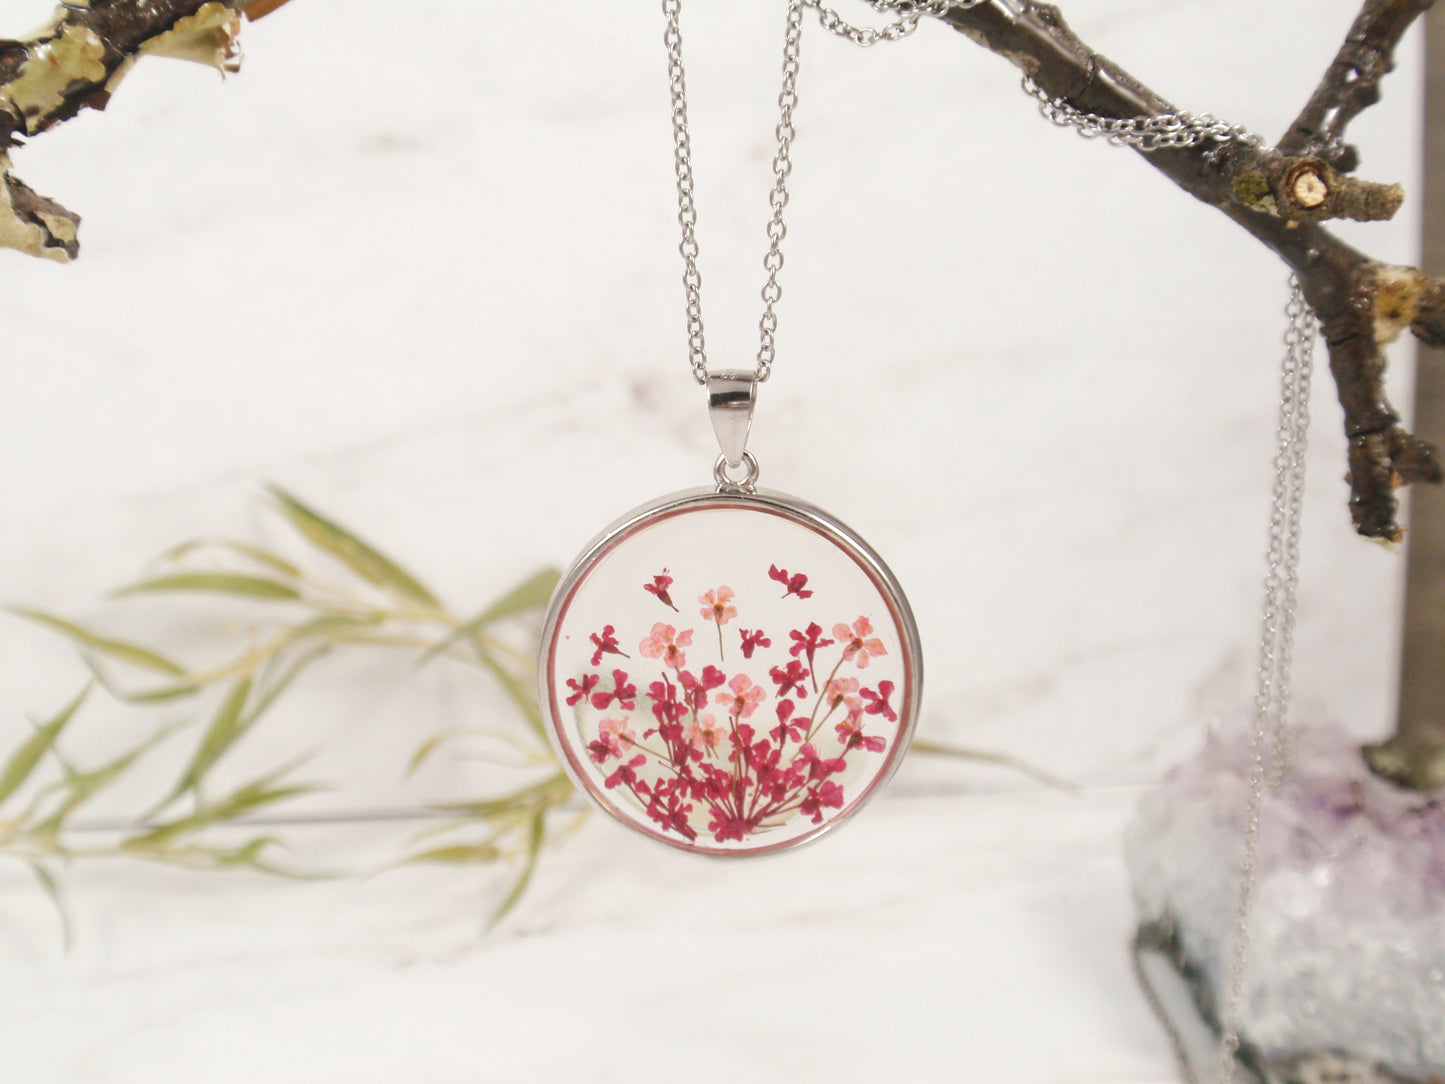 Queen Annes lace flower resin necklace